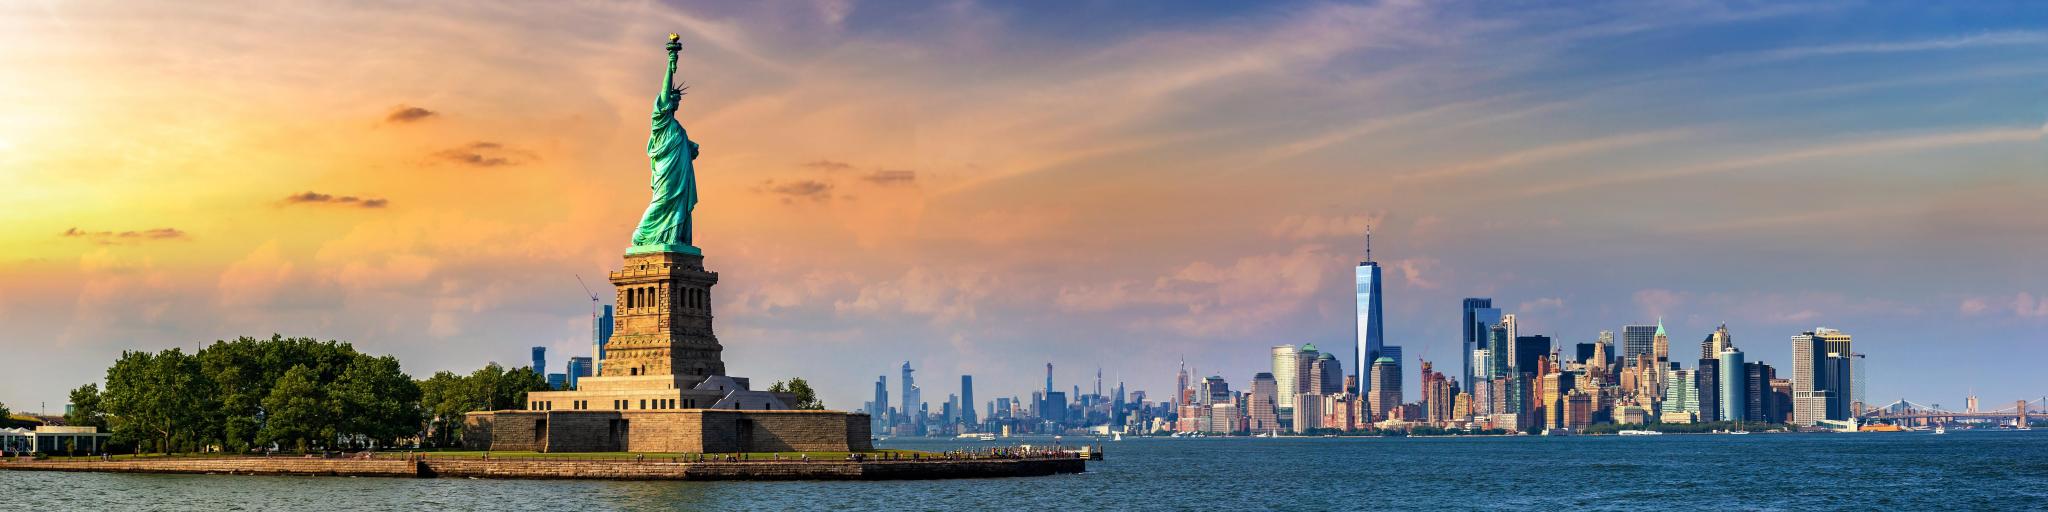 Panoramic view of Manhattan in the distance with the Statue of Liberty in view during sunset